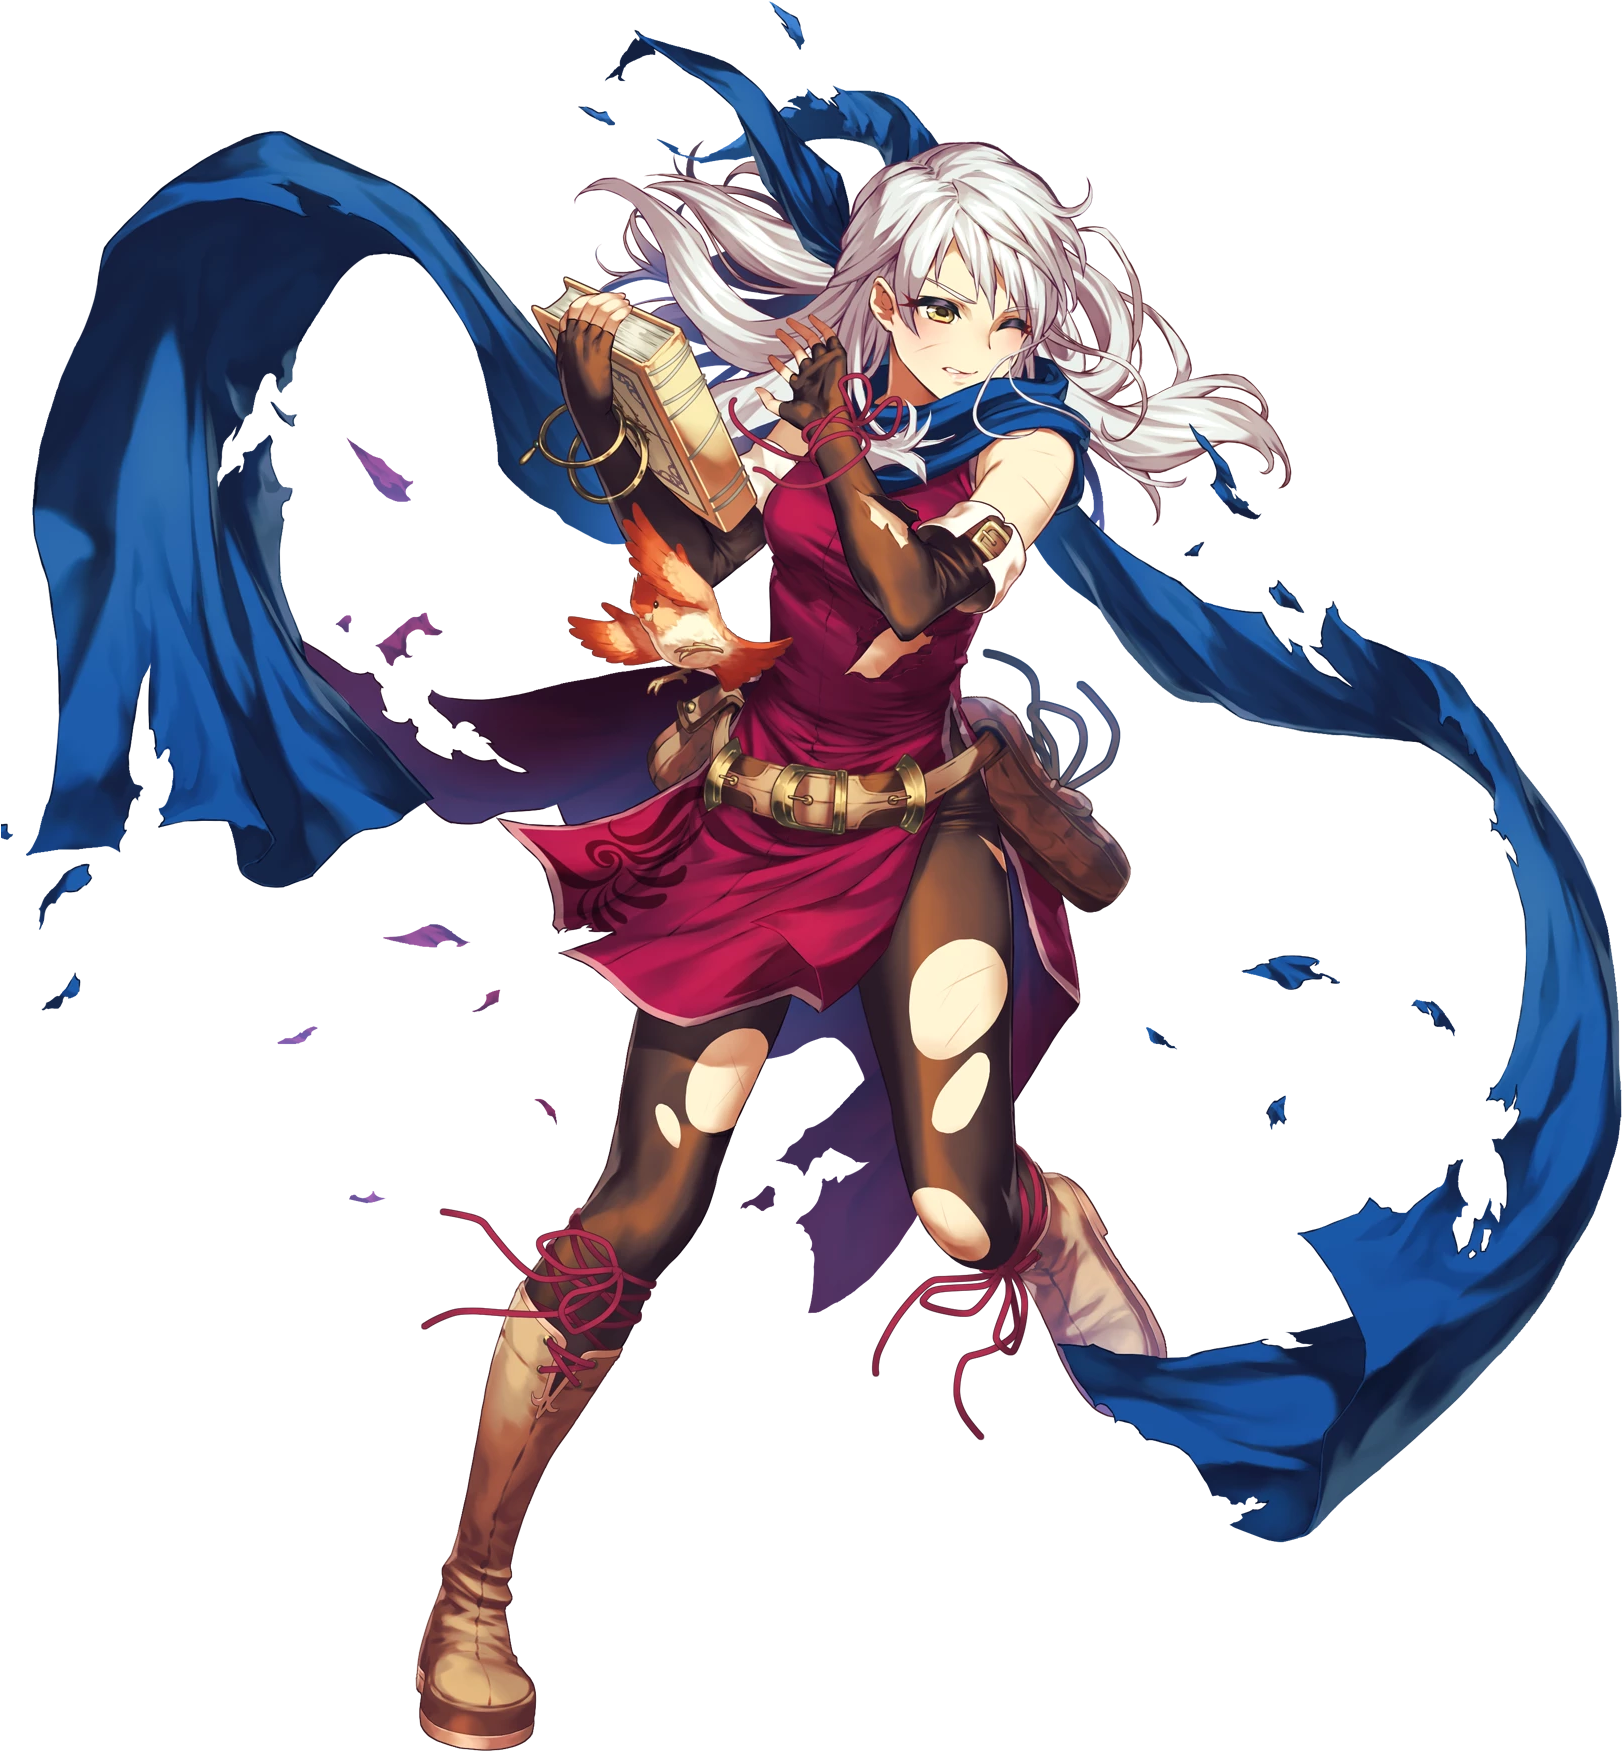 Resized To 50% Of Original - Micaiah Fire Emblem Clipart (1684x1920), Png D...